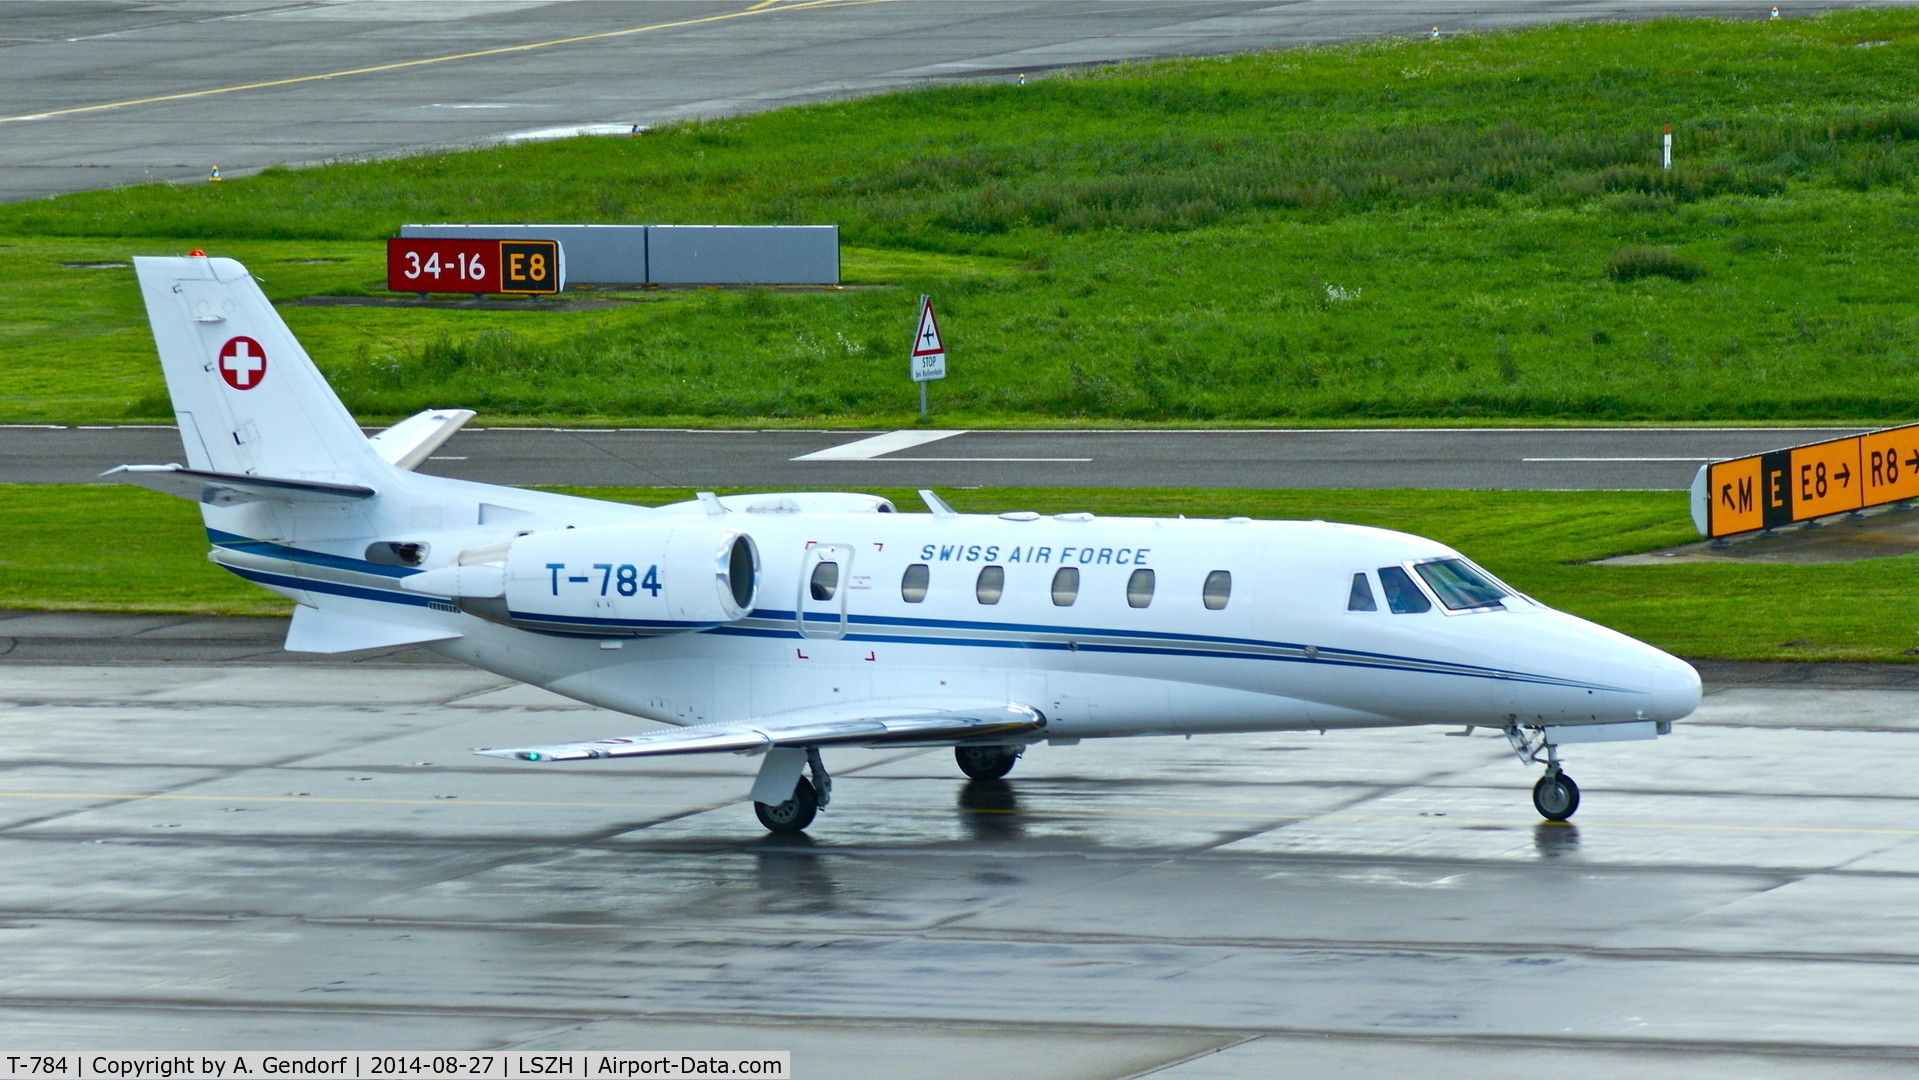 T-784, 2002 Cessna 560 Citation Excel C/N 560-5269, Swiss Air Force, is here ready to taxi at Zürich-Kloten(LSZH)